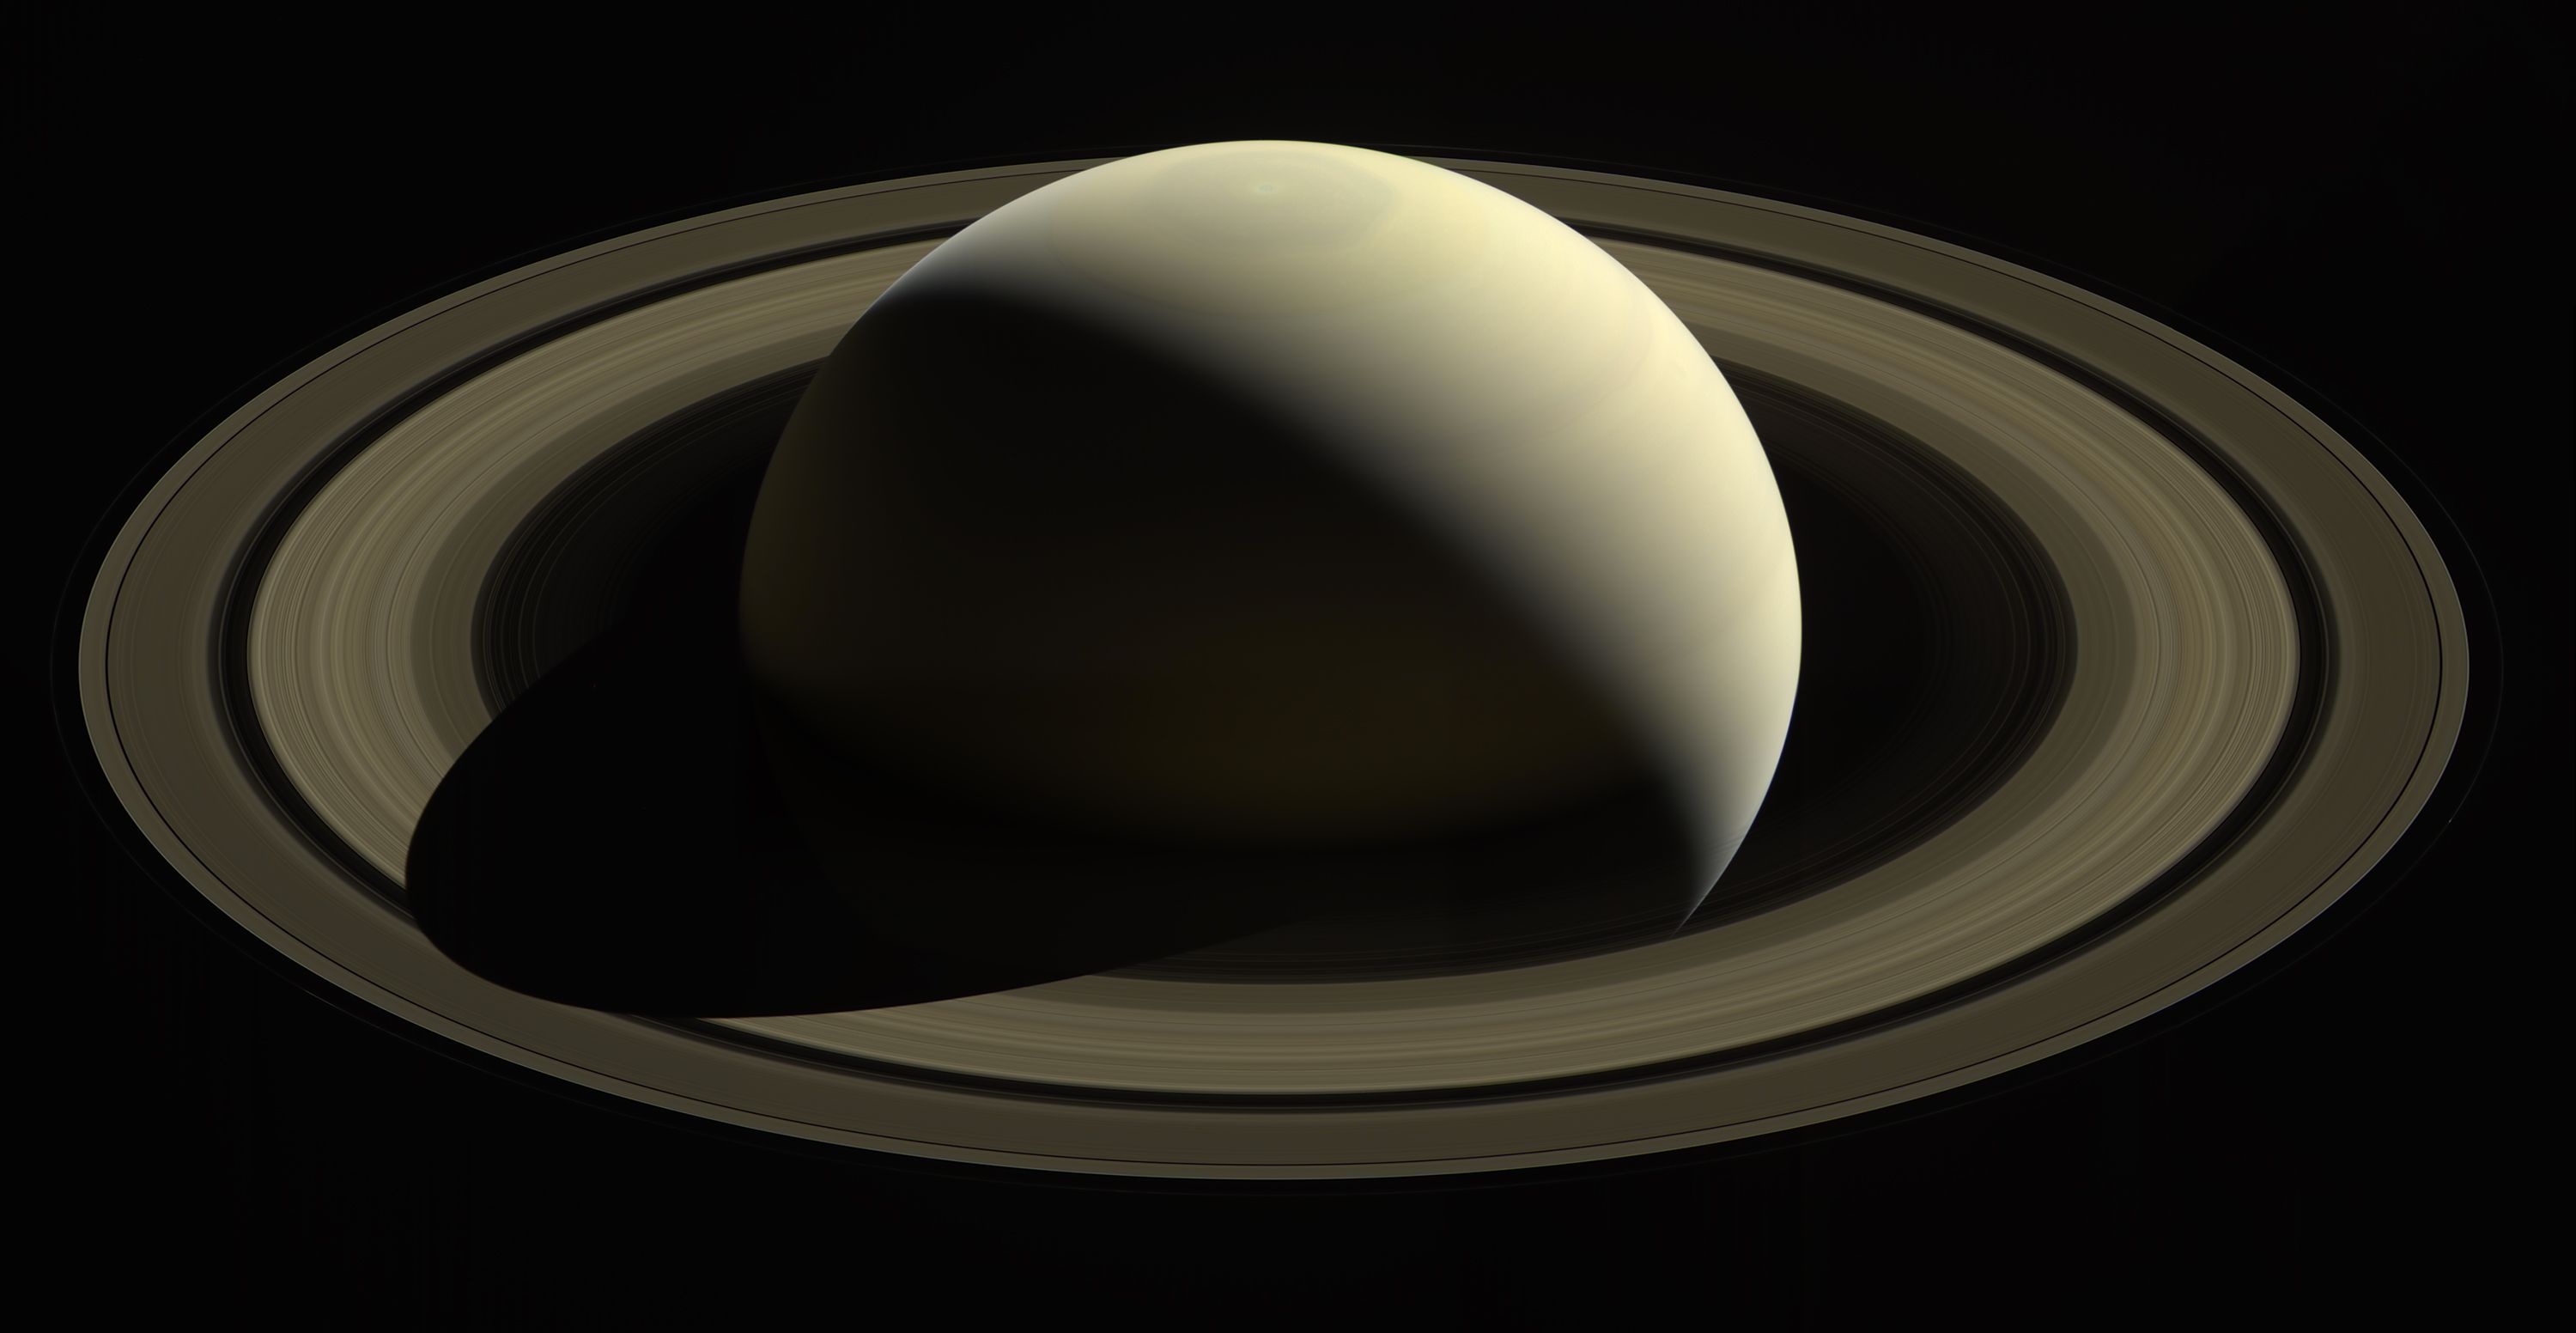 Scientists Say Saturn's Rings Are Disappearing